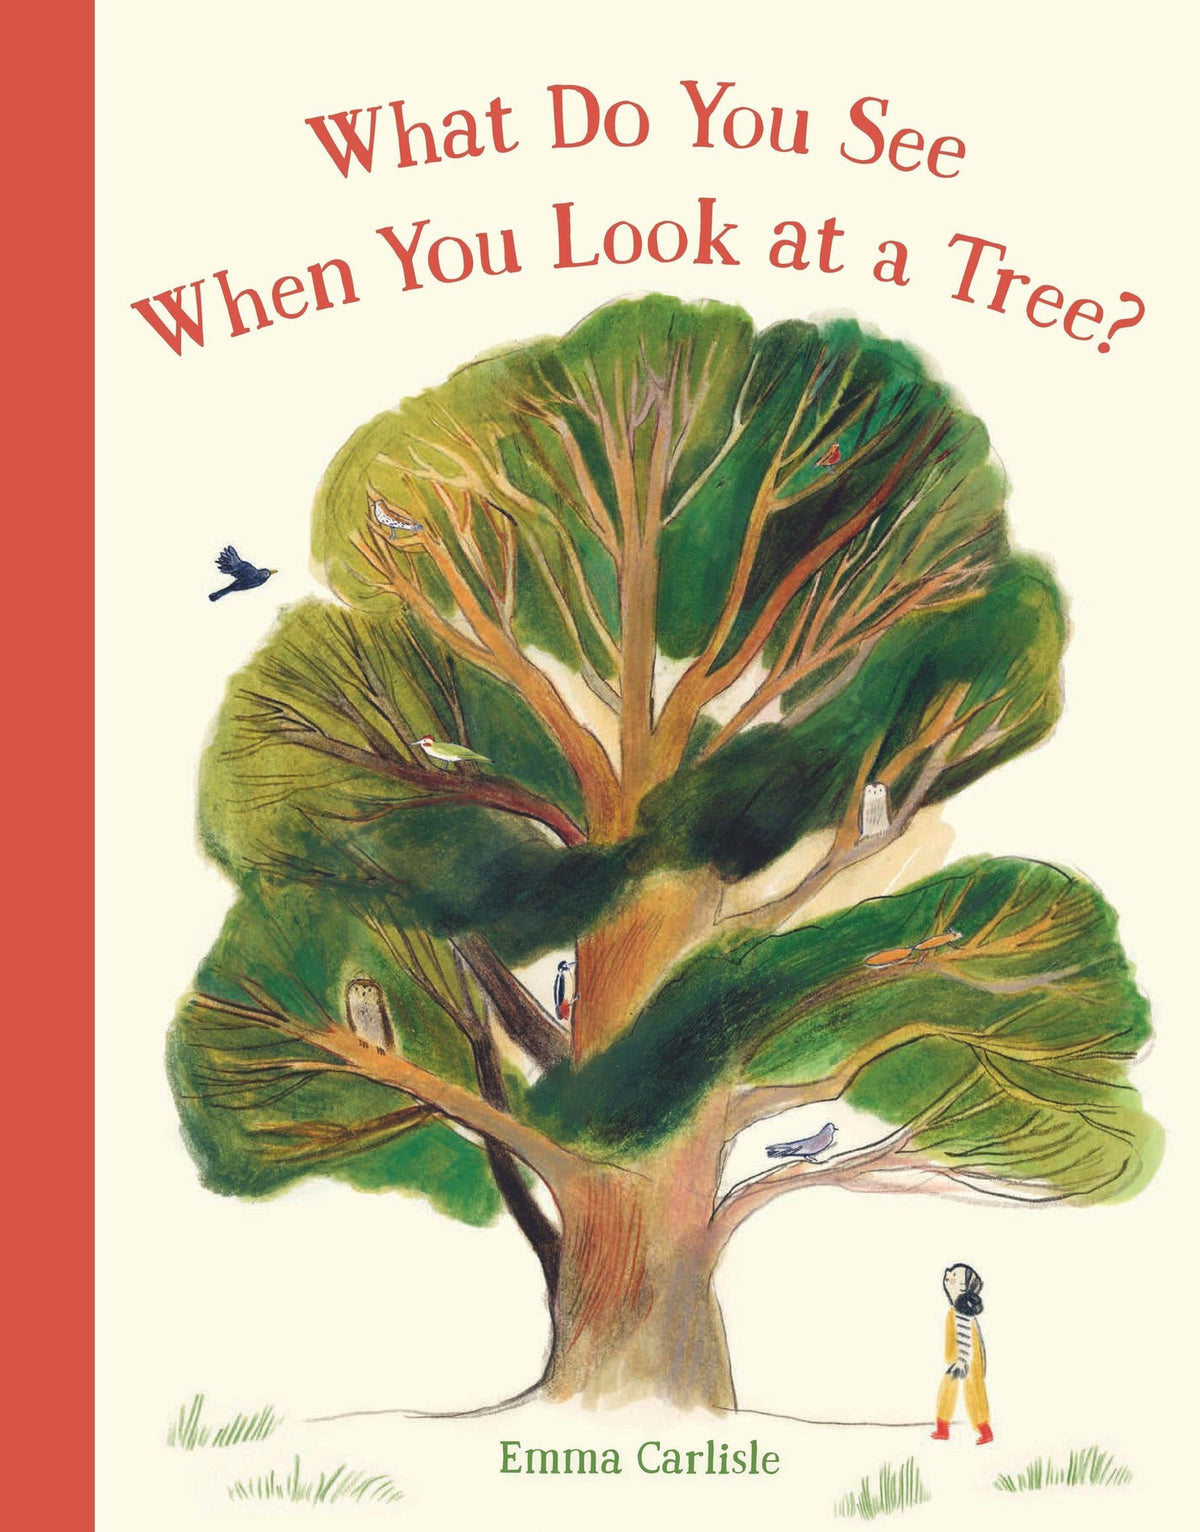 What Do You See When You Look at a Tree? By Emma Carlisle from Penguin Random House